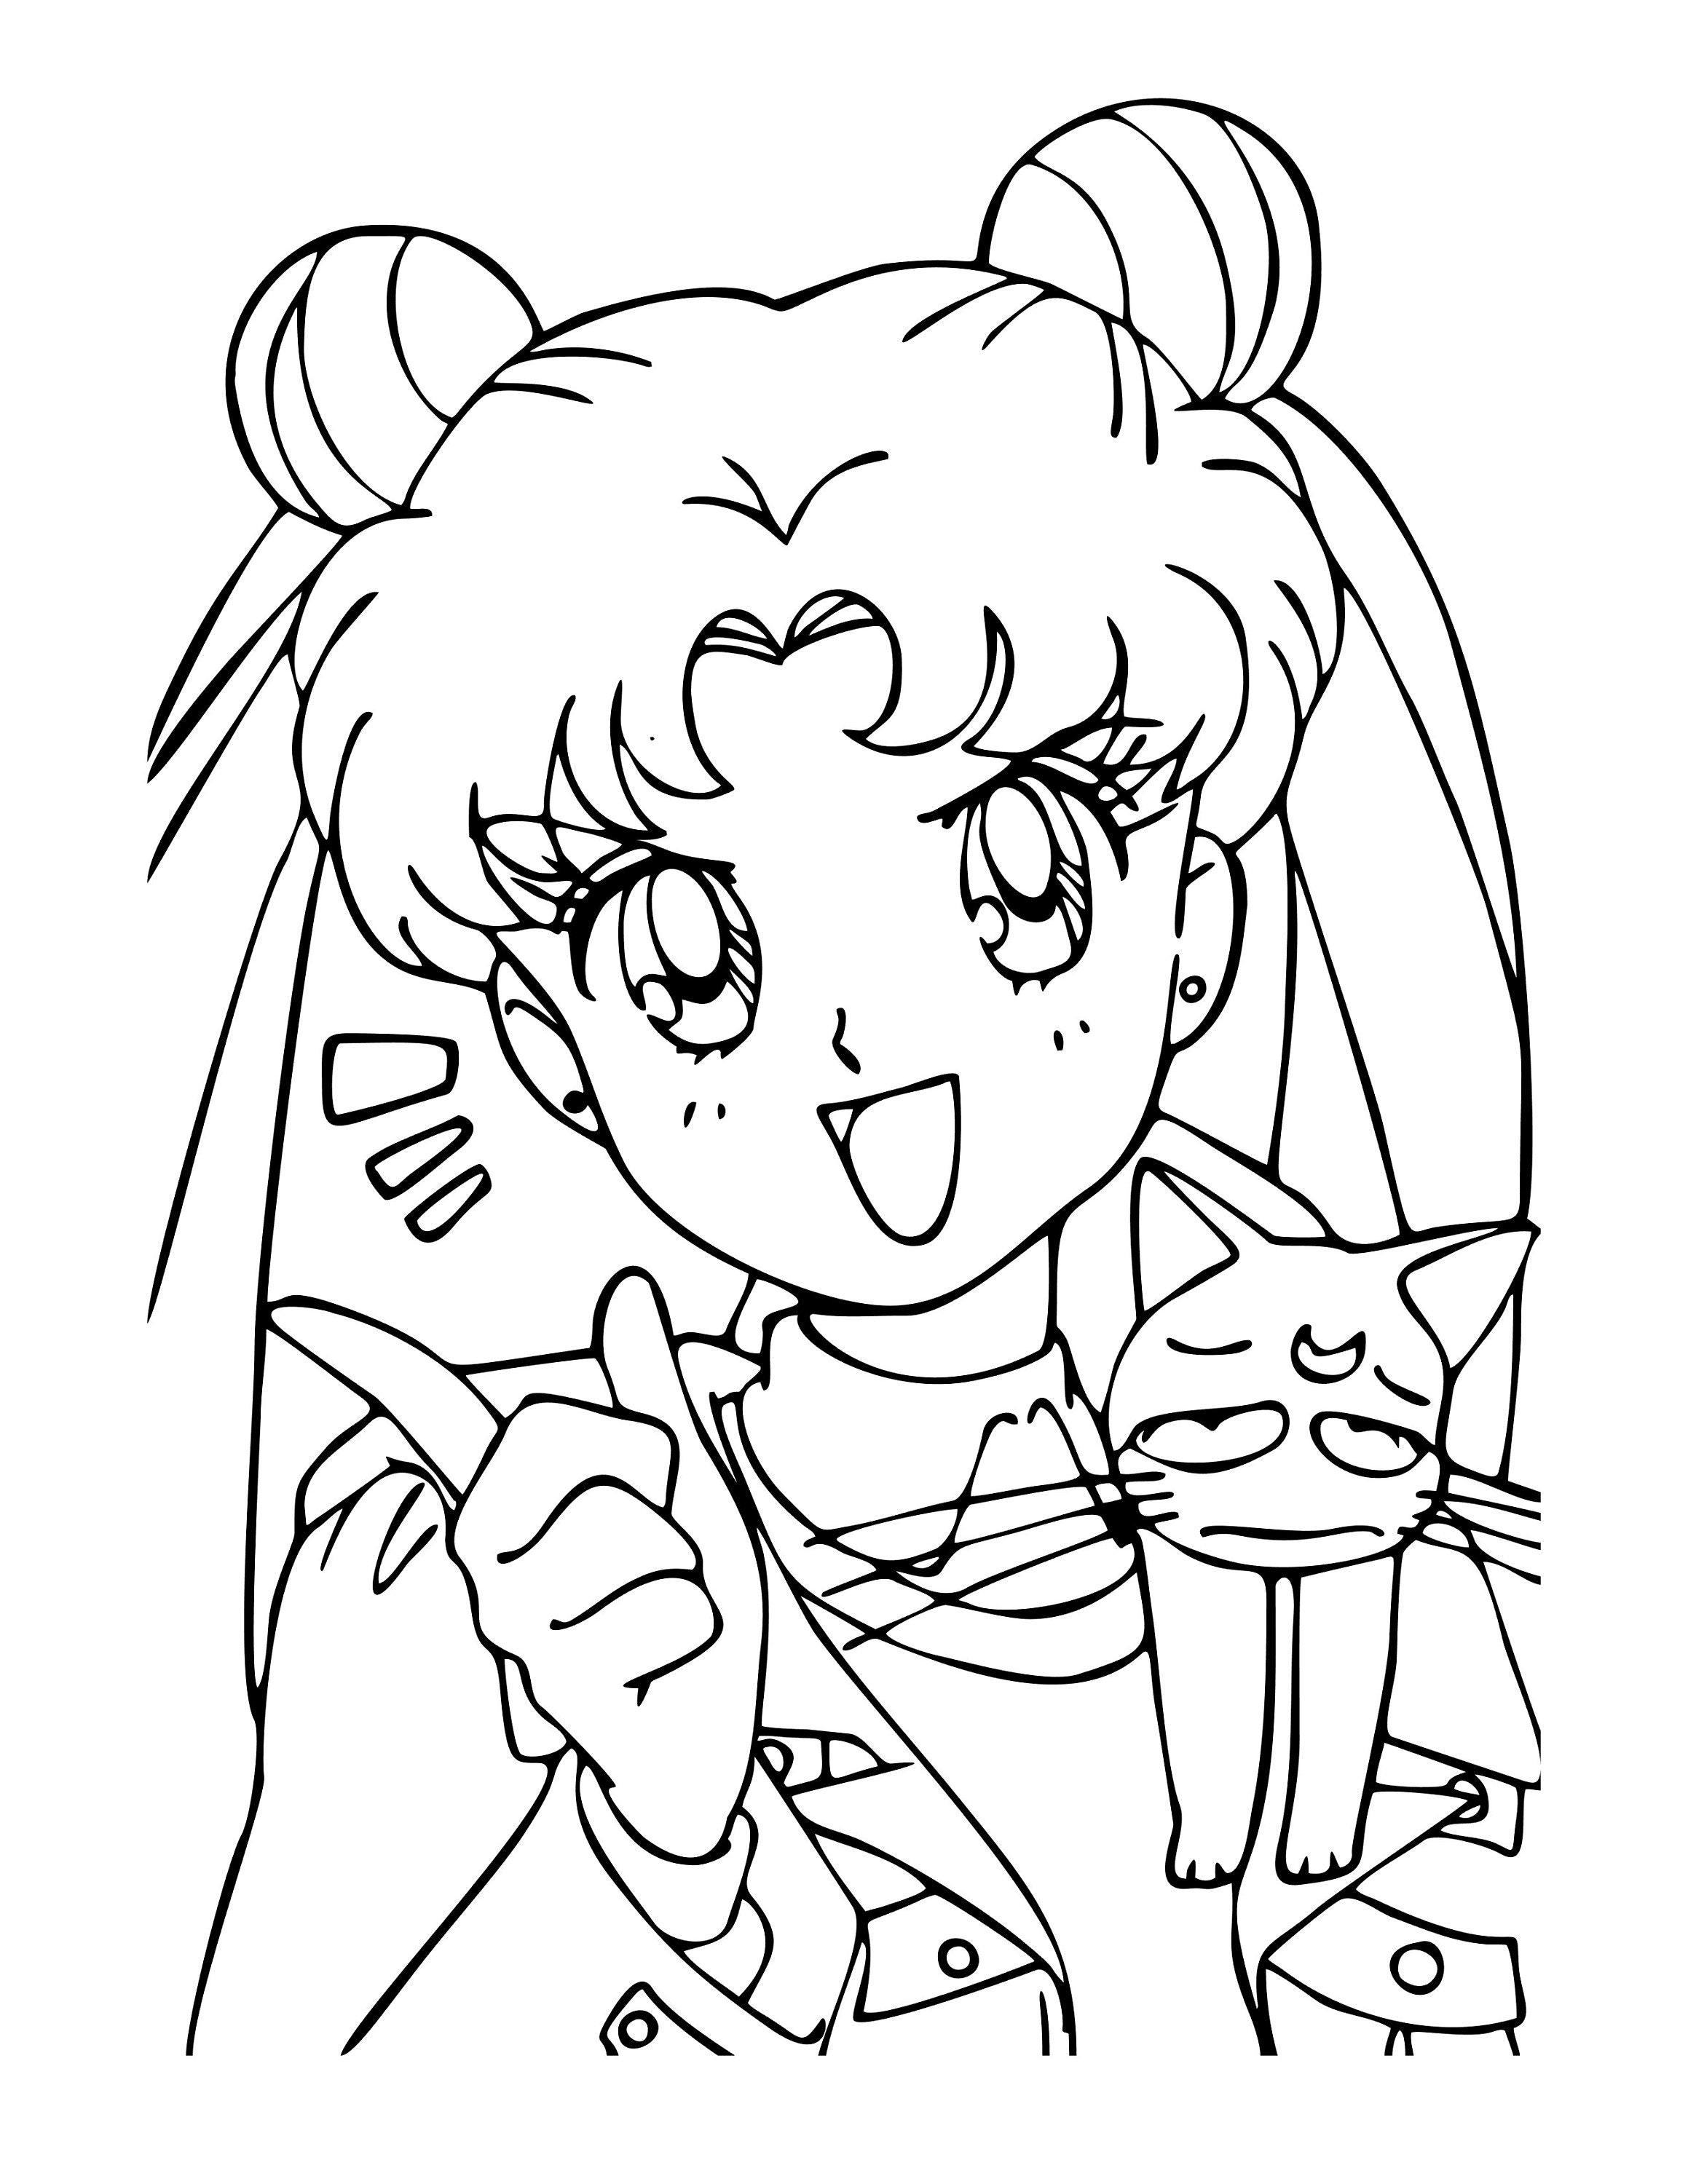 Sailor Moon Anime Coloring Pages Fun for Kids and All Ages   Etsy